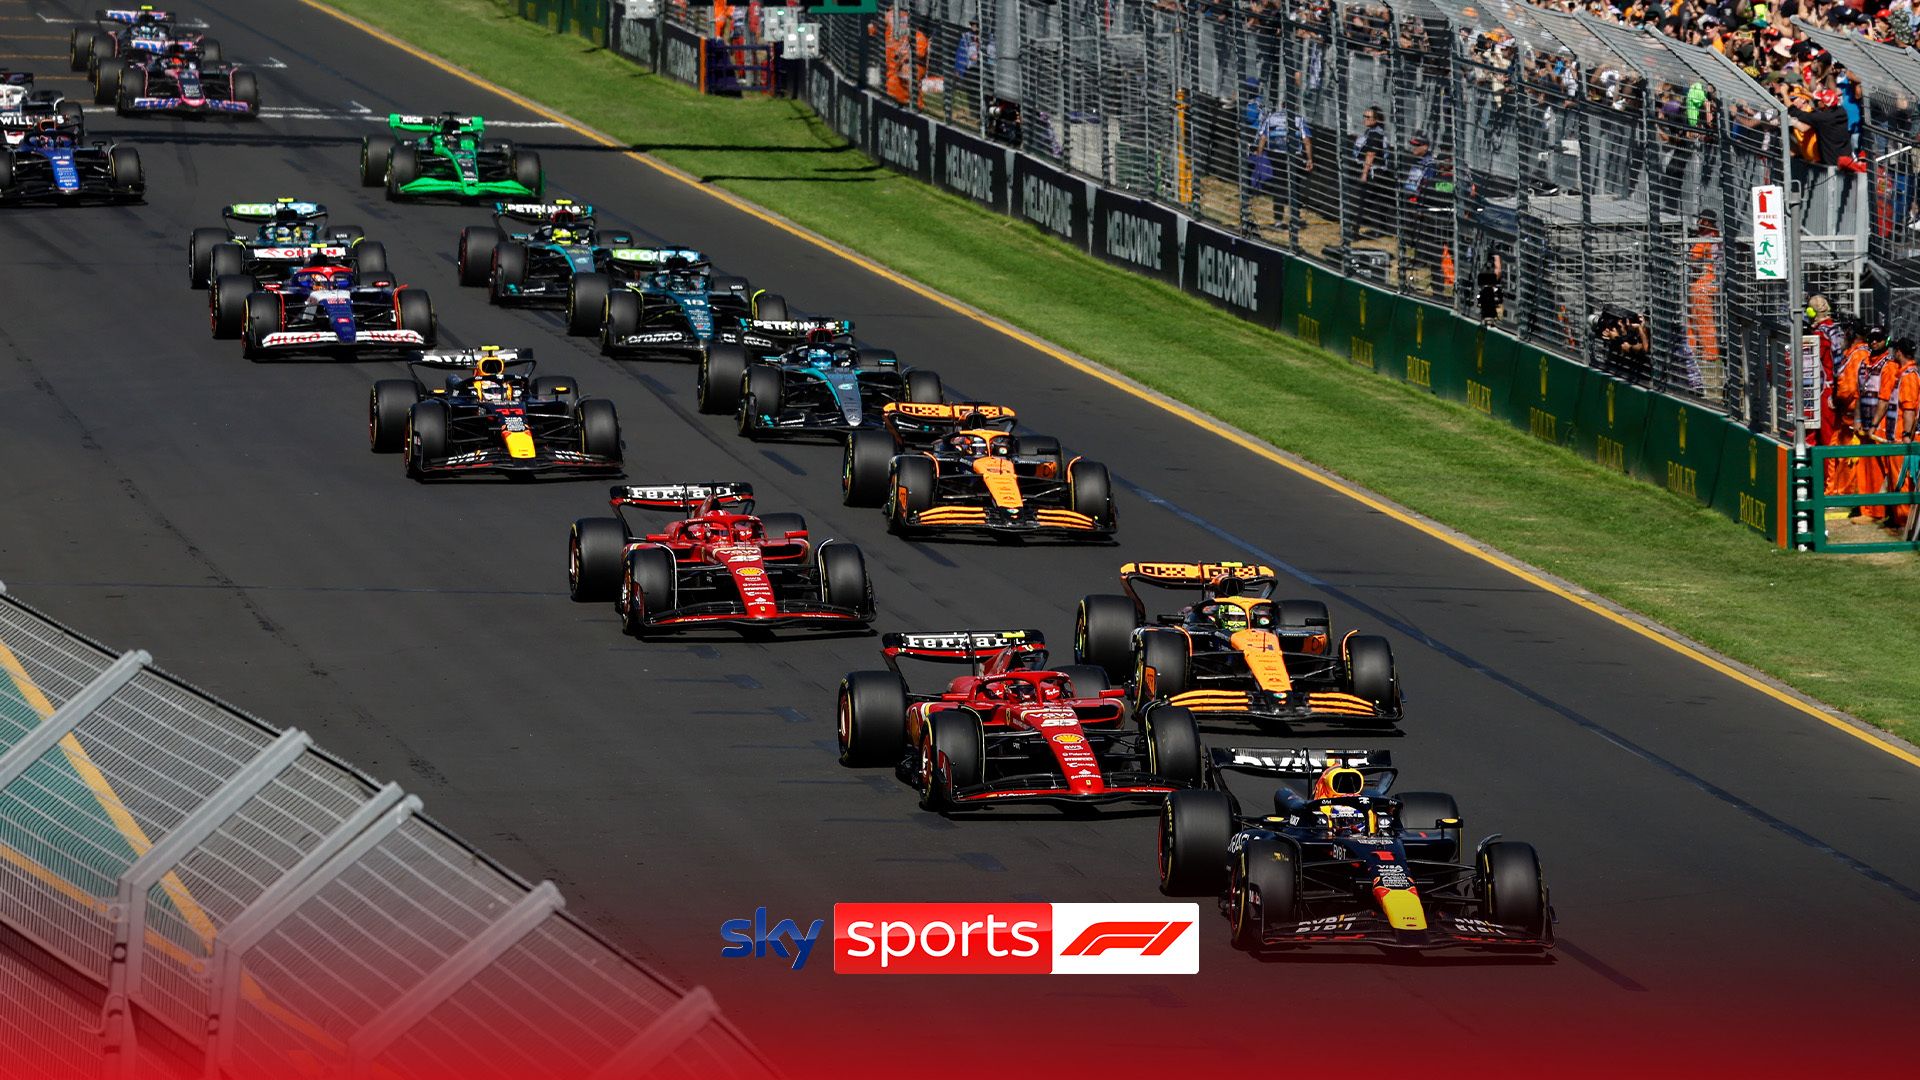 Story of the chaotic Australian GP